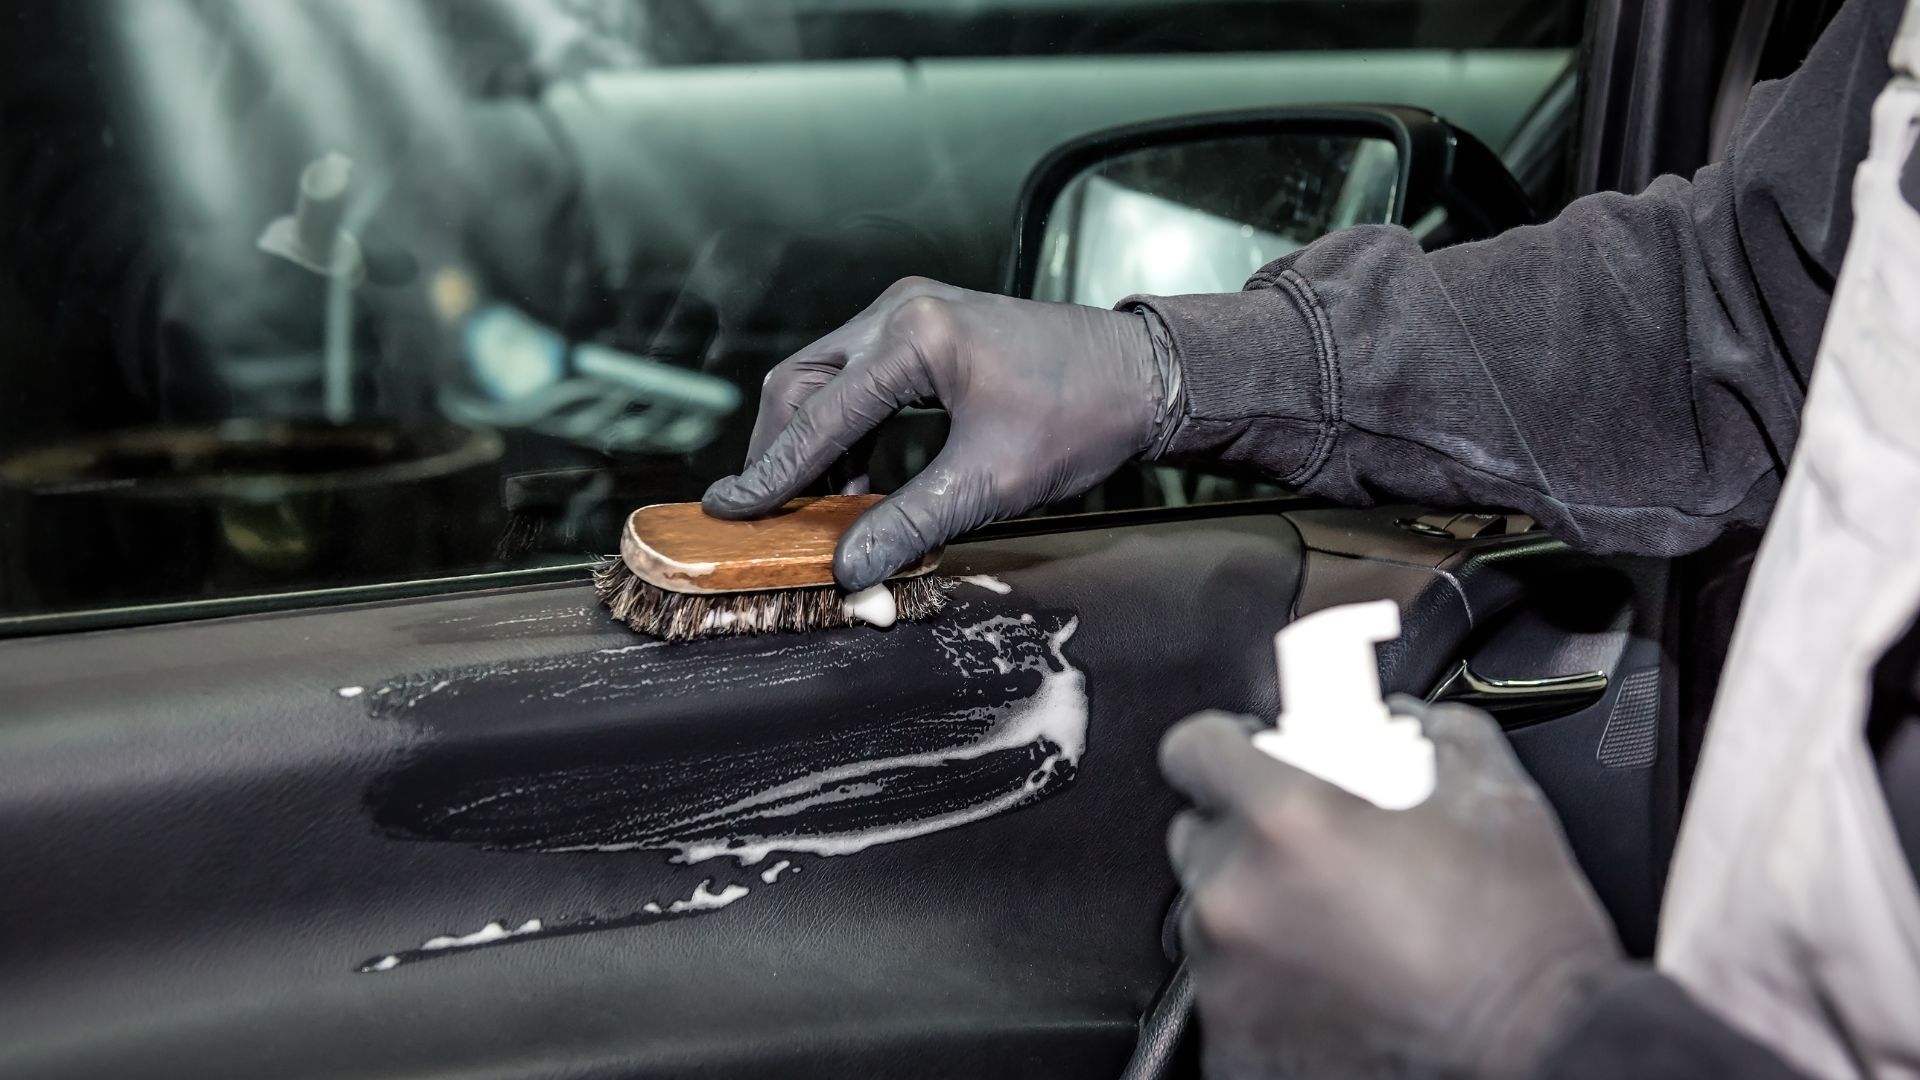 In Duluth, GA, a close-up shot shows a worker detailing a car's interior door. The worker, wearing black gloves and a dark sweatshirt, scrubs the door panel with a brush, creating lather with a cleaning solution. The door panel is black, and a vehicle's side mirror and window are visible in the background, slightly blurred. The worker holds a spray bottle in the foreground, suggesting a thorough cleaning process is underway, indicating attention to detail and care in vehicle maintenance.